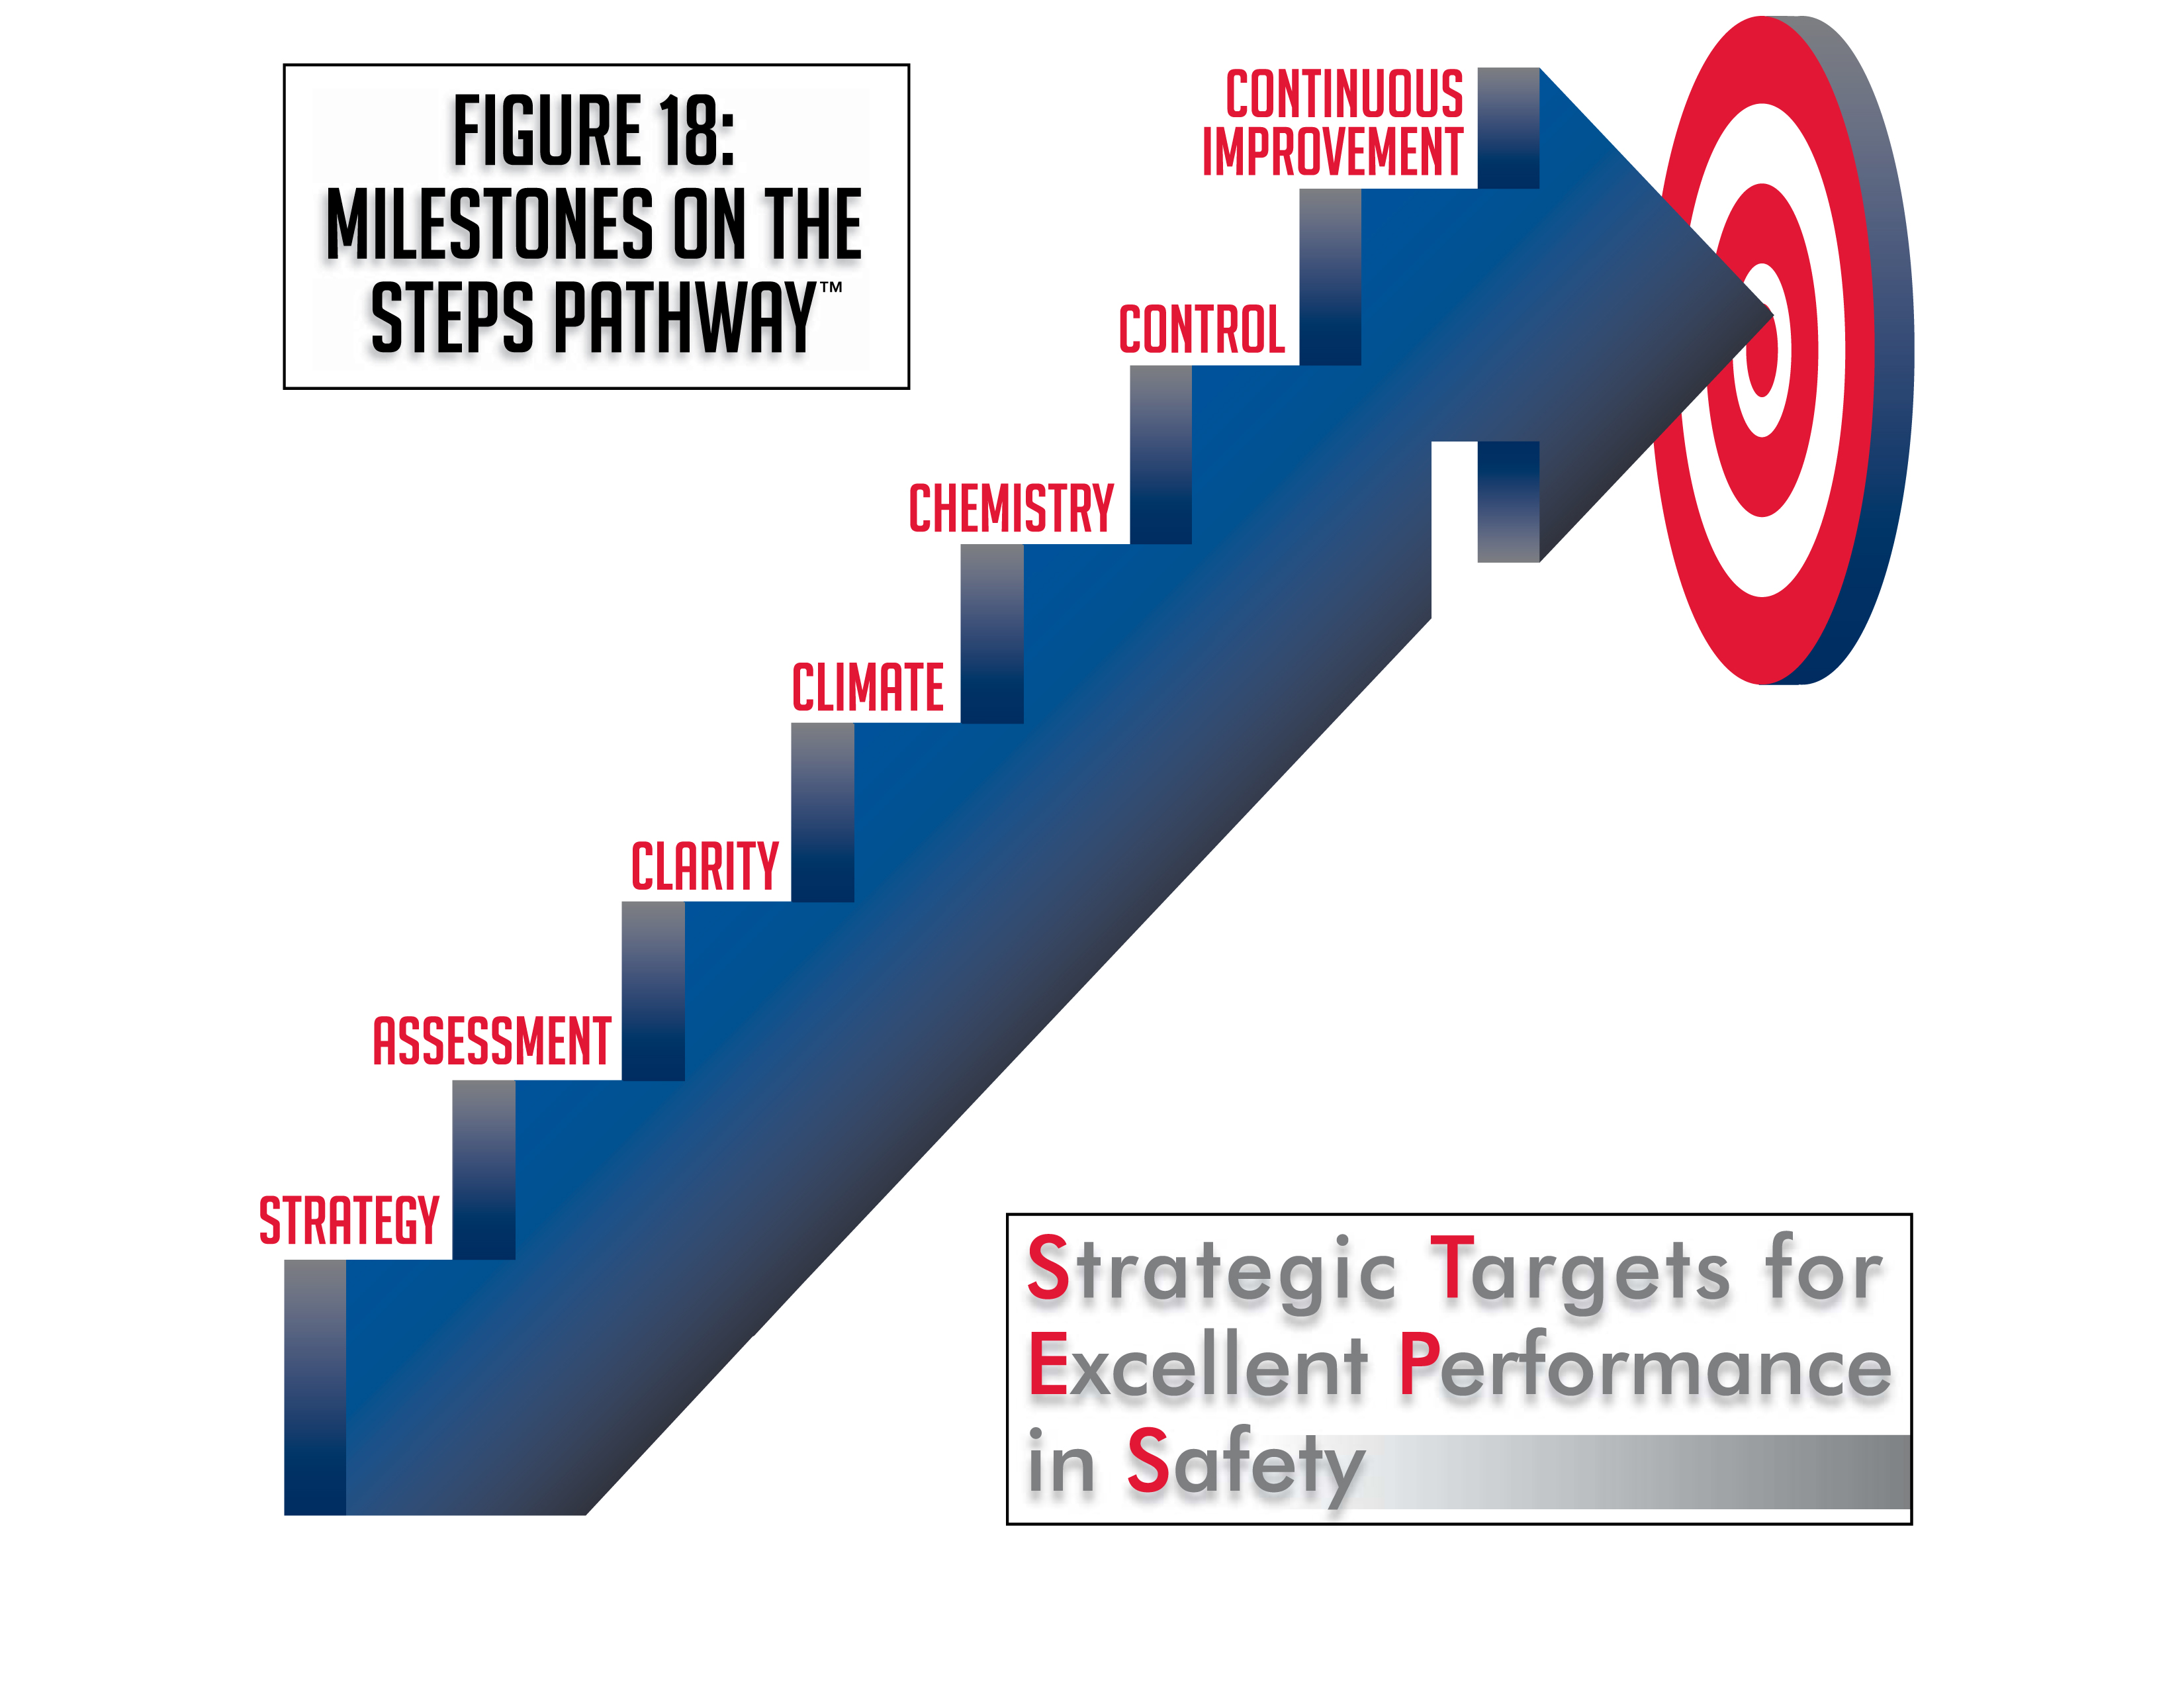 Strategic Targets for Excellent Performance in Safety